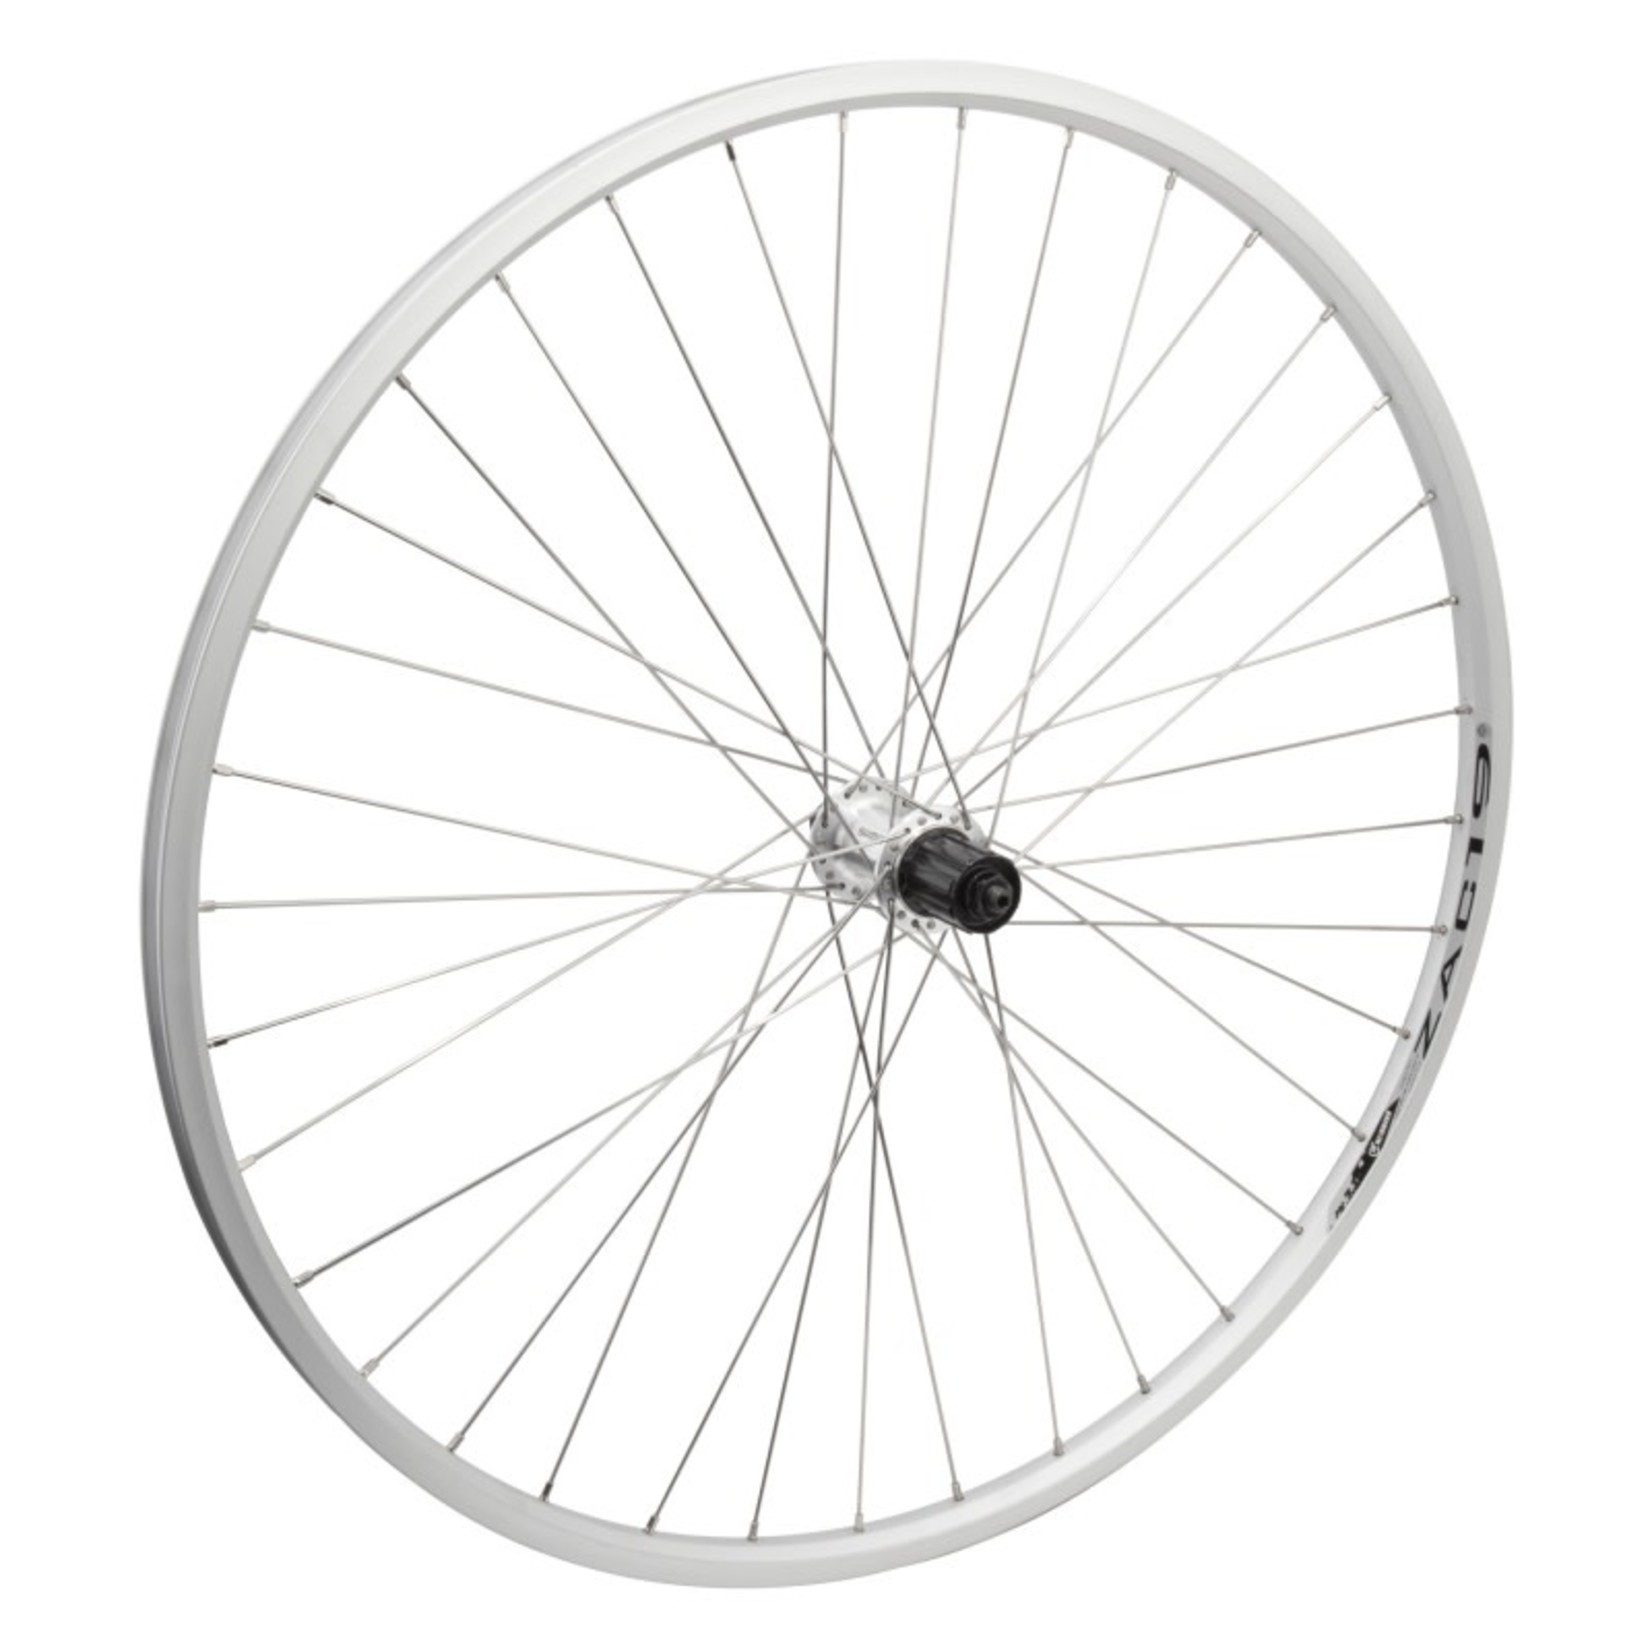 Wheel Master 700C/29" Alloy Hybrid/Comfort Double Wall Rear Wheel 8-10 Cass QR 135mm Stainless Steel Silver